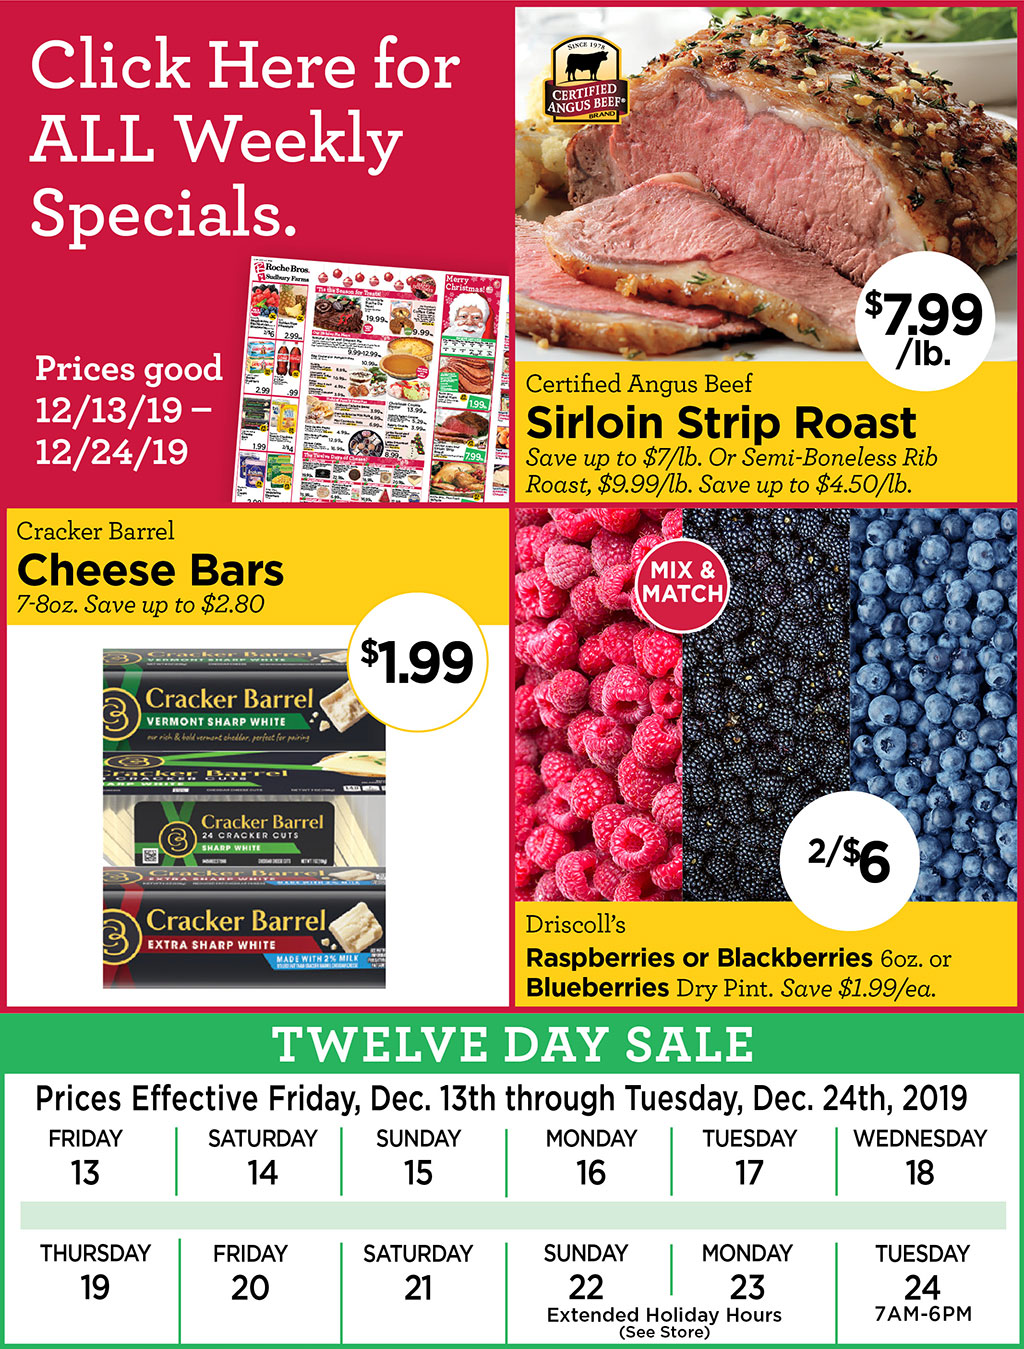 Certified Angus Beef Sirloin Strip Roast $7.99/lb. Save up to $7/lb. Or Semi-Boneless Rib Roast, $9.99/lb. Save up to $4.50/lb., Cracker Barrel Cheese Bars $1.99 7-8oz. Save up to $2.80, Mix & Match Driscolls Raspberries or Blackberries 6oz. or Blueberries Dry Pint. 2/$6 Save $1.99/ea.   Click Here for ALL Weekly Specials. Prices good 12/13/19  12/24/19 - TWELVE DAY SALE Prices effective Friday Dec. 13 through Tuesday Dec. 24, 2019. 12/22 & 12/23 extended holiday hours (see store), 12/24 open 7am-6pm